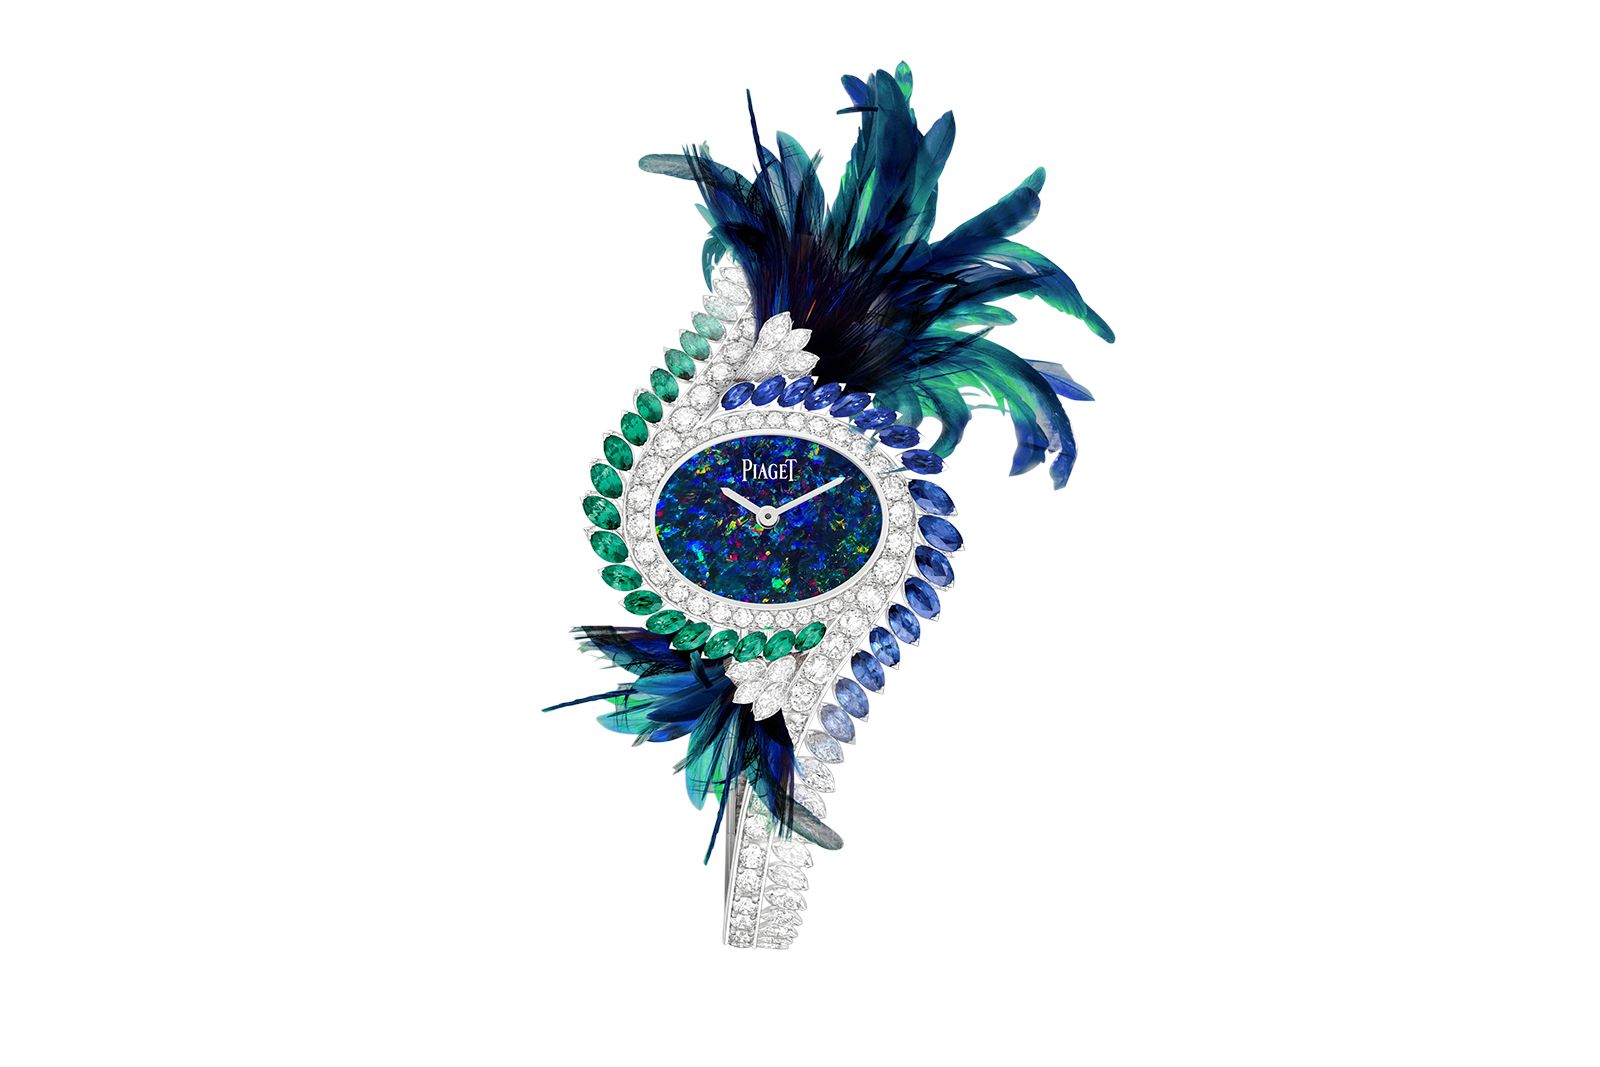 Piaget Extravagant Touch Transformable High Jewellery watch in white gold, sapphire, emerald, diamond, black opal and feathers 